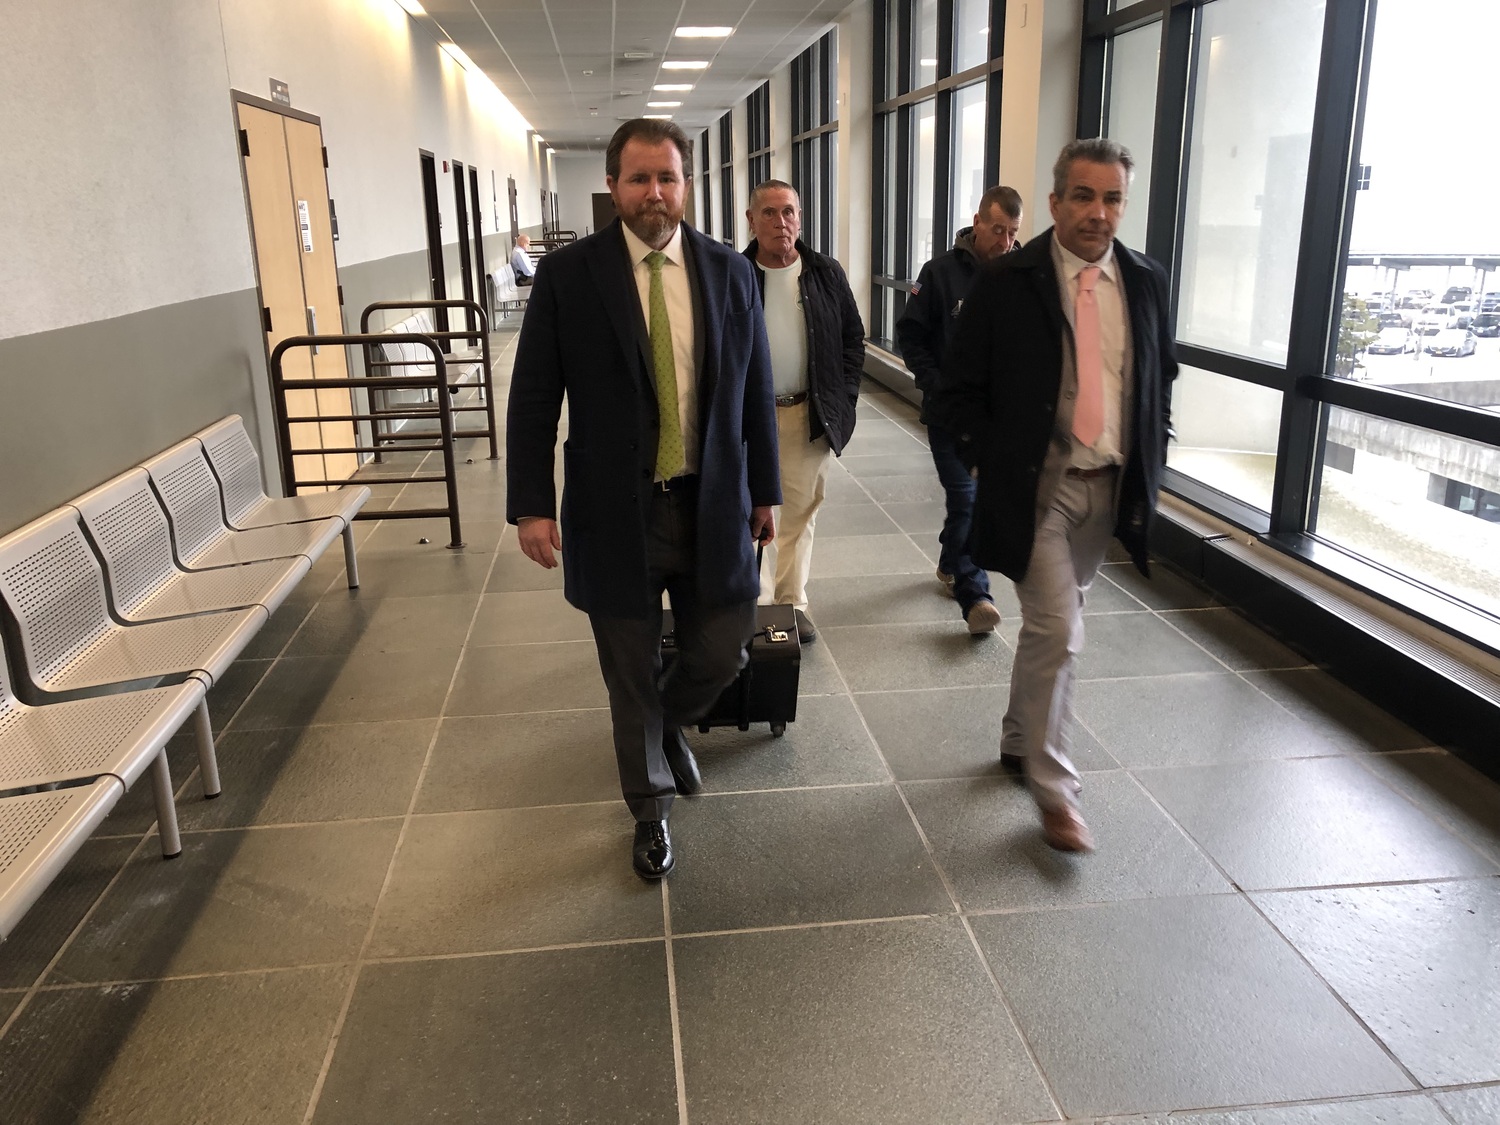 Raymond Bouderau, on the right, leaving the courtroom after pleading guilty on Thursday, January 18, to committing the September 25, 2022, burglary of a Sag Harbor residence. He will be sentenced to three and a half years incarceration early this spring. His attorney Jonathon Manley is on the left. T.E. McMORROW